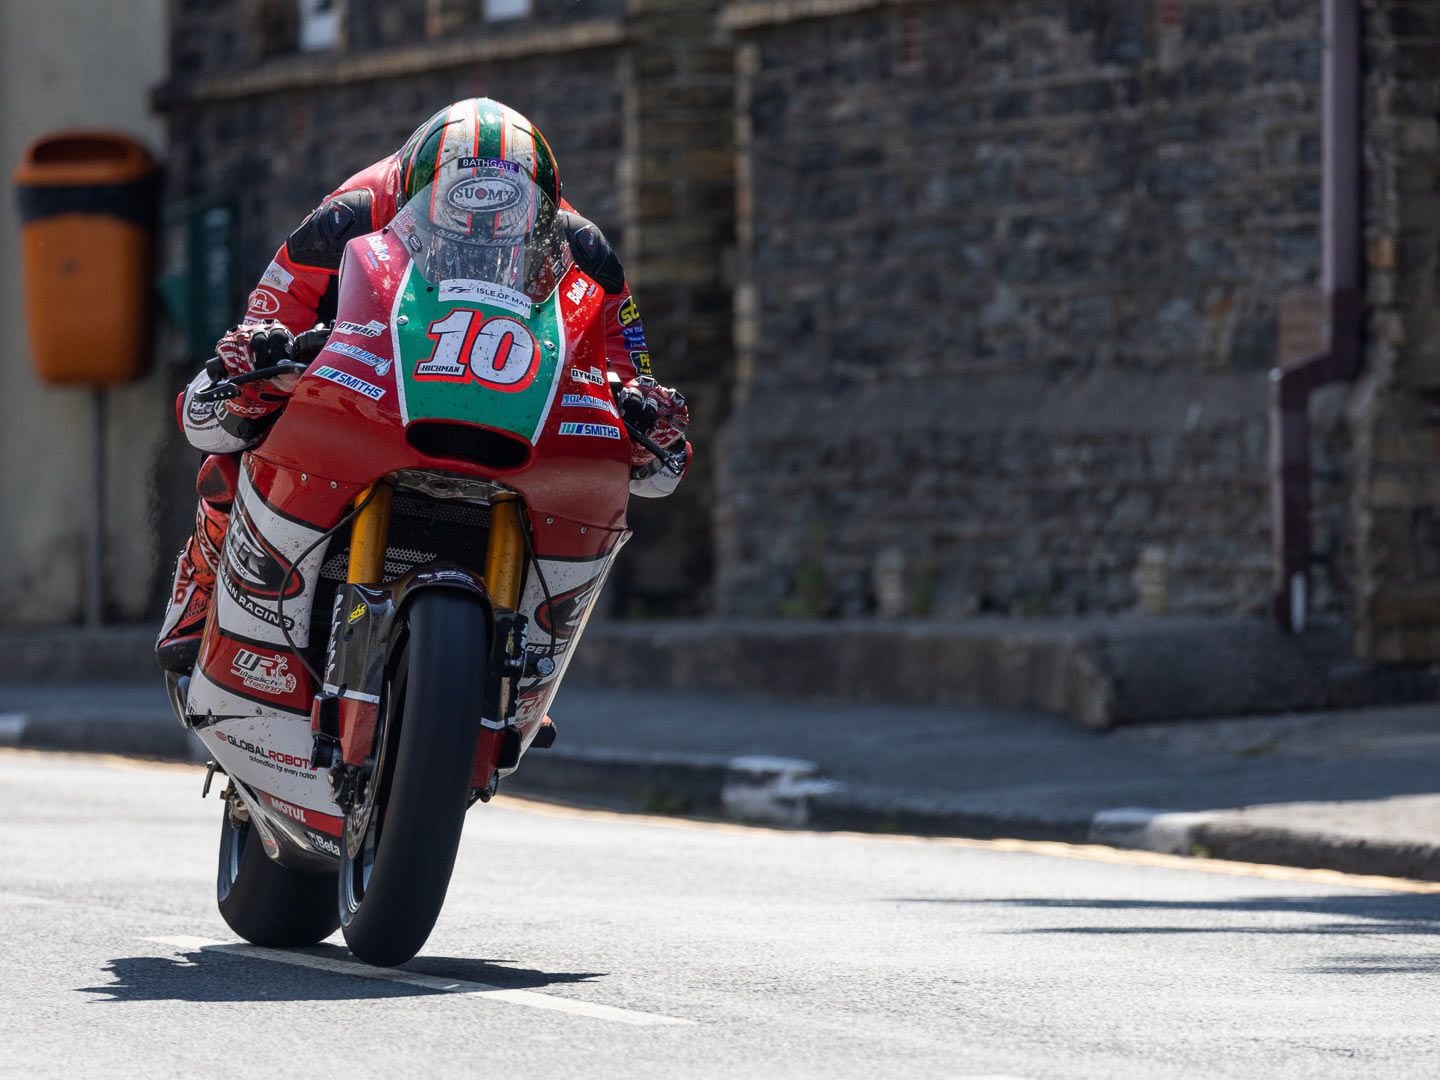 Hickman entered the penultimate day of racing with one win, to Dunlop’s four victories. Hickman dominated the Superstock race on his FHO Racing BMW M 1000 RR, posting a new TT lap record of 136.358. The Superstock category mandates treaded road tires and except for bodywork is essentially the same as you can purchase at a BMW dealer. After a break, Hickman came back on his Yamaha R7 to win the second Supertwin event.